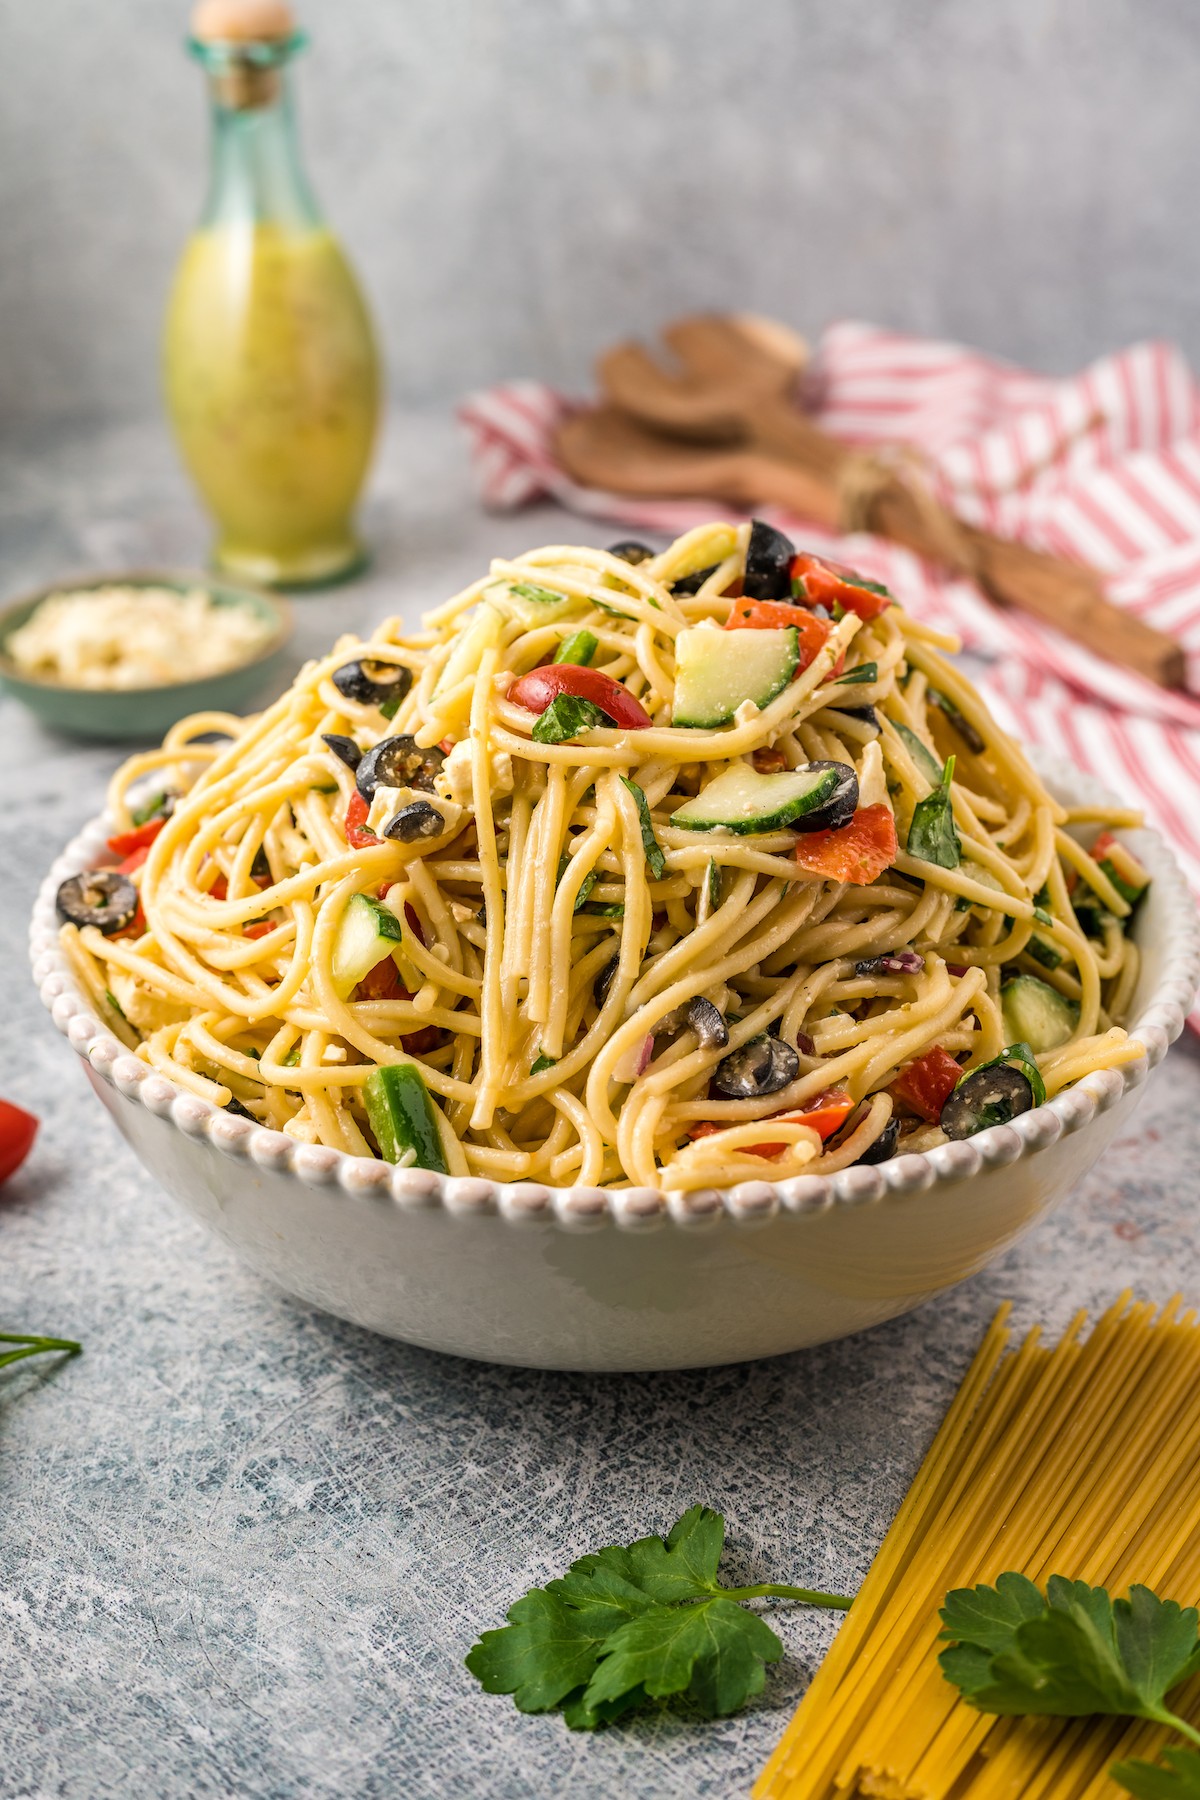 A large bowl of pasta salad with olives, tomatoes, and more.